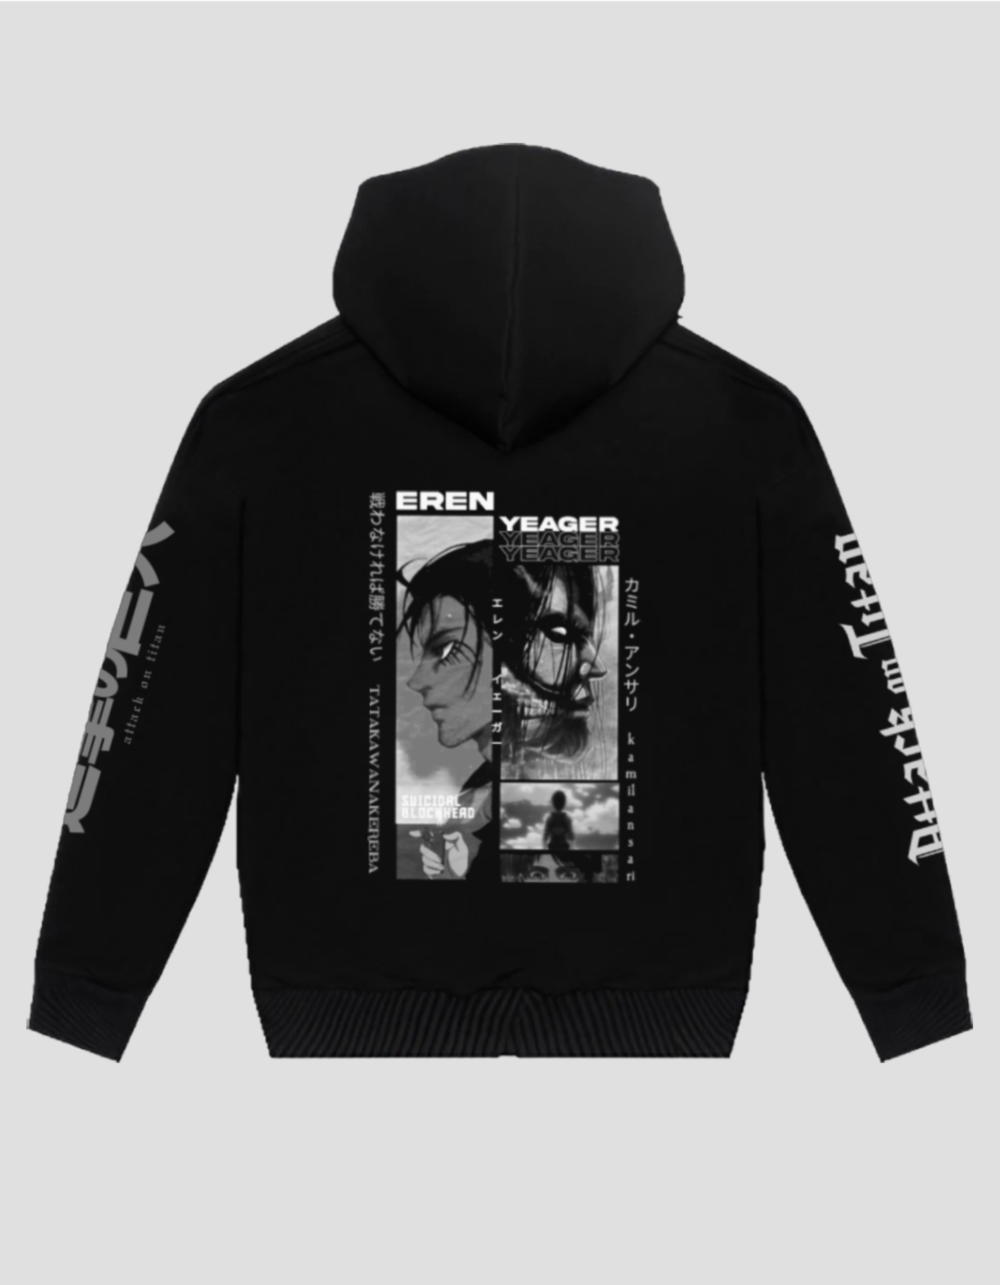 Attack on titan hoodie - back